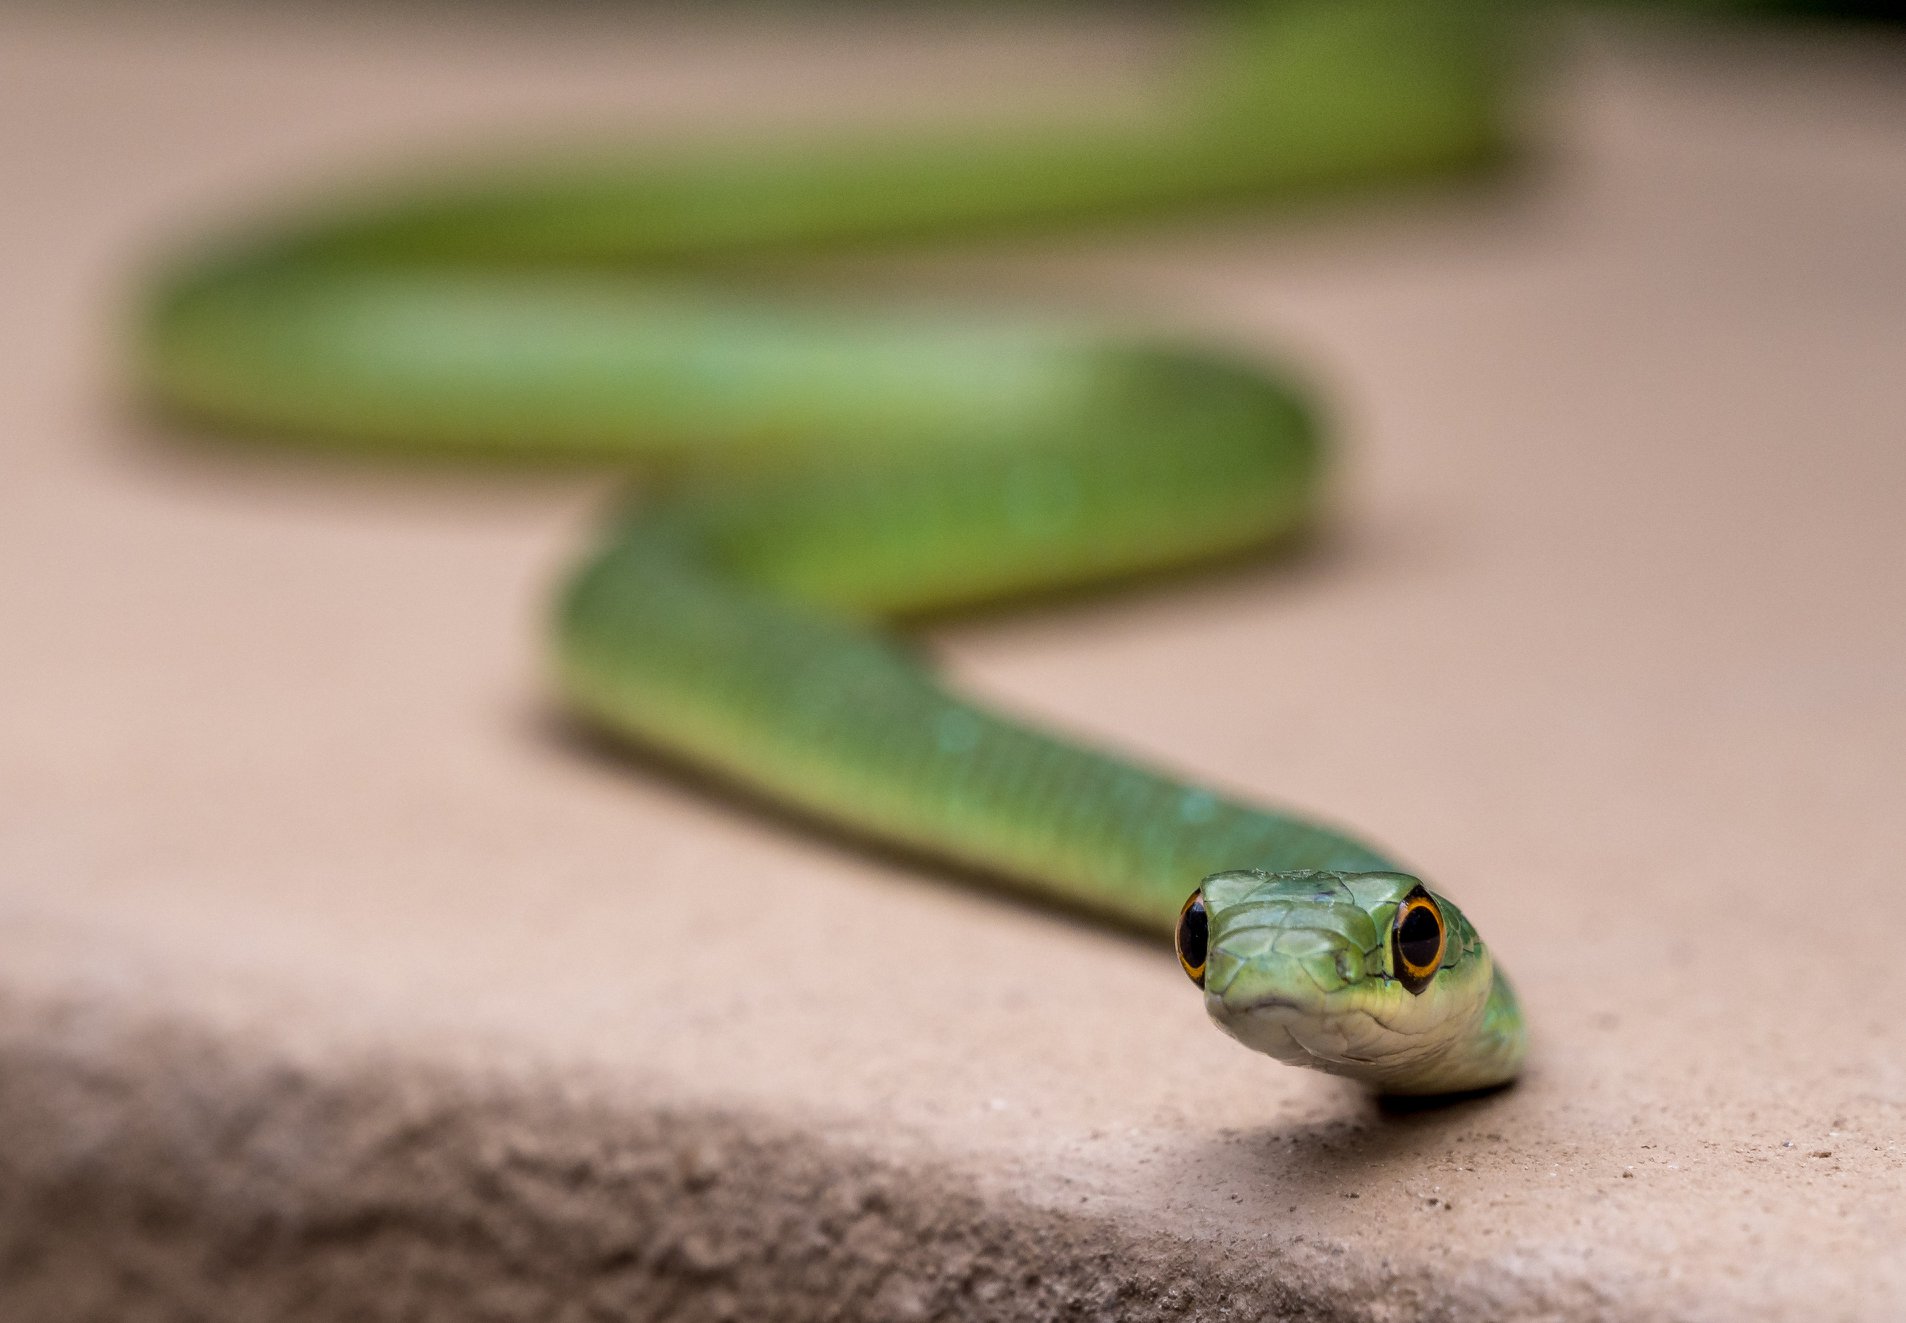 Peter Reitze Snake 2020 Facebook Photo Competition Finalist